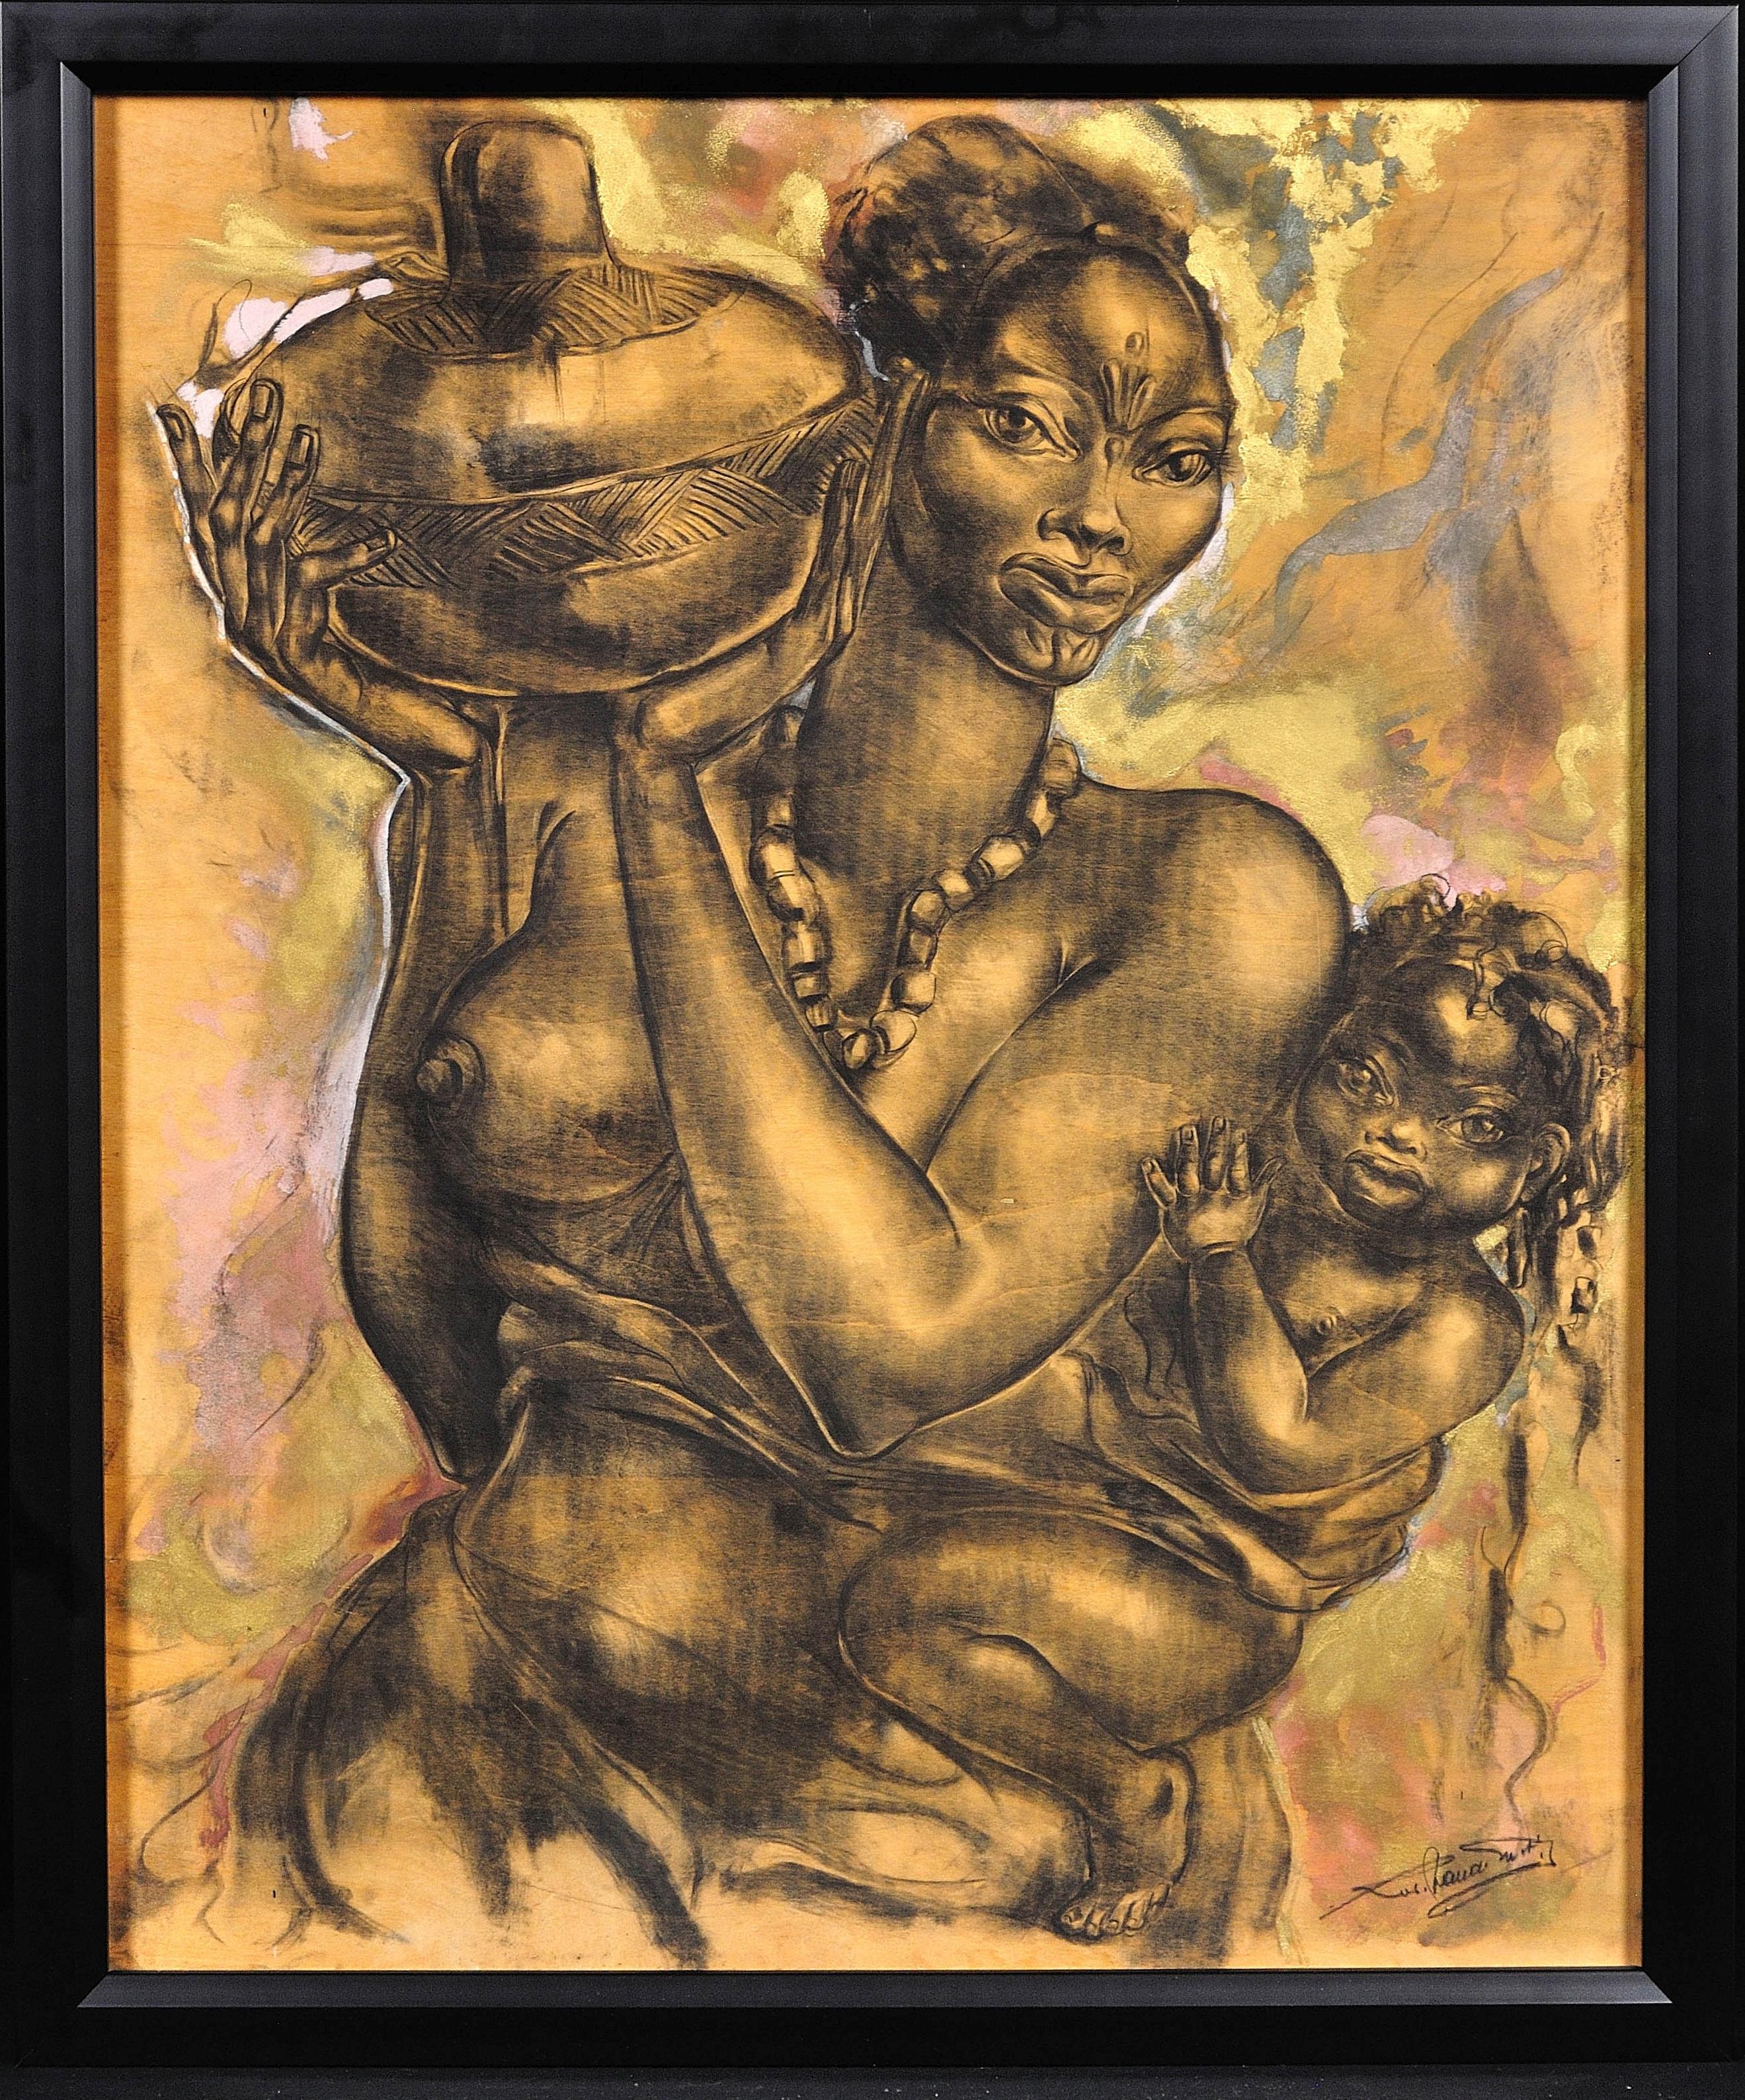 Unknown Portrait Painting - Mother and Child. Bold Very Accomplished 20th Century Stand Out Modern Artwork.